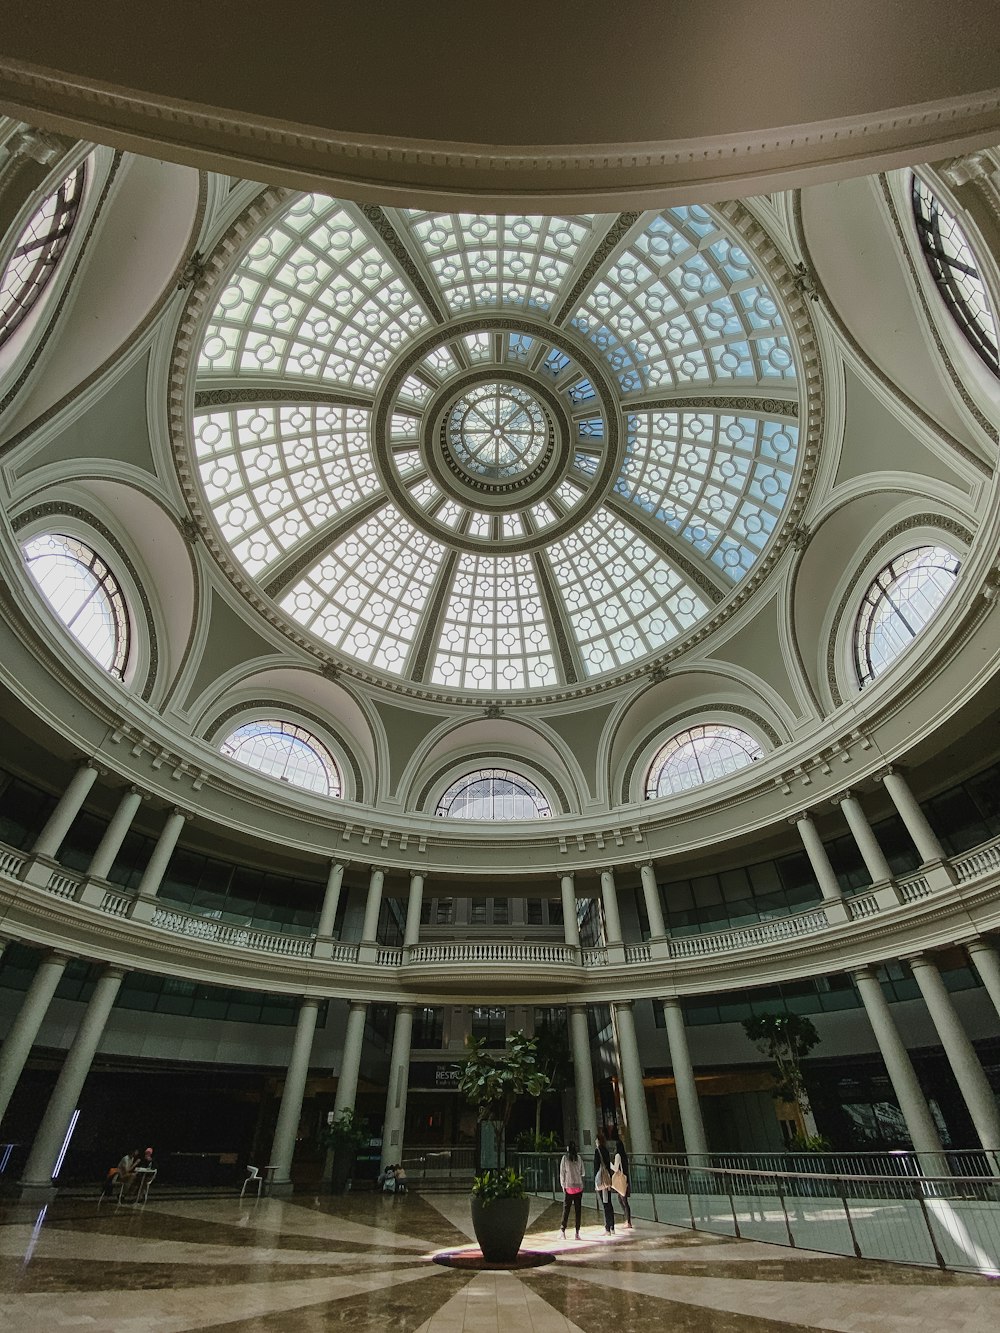 a domed ceiling in a building with a skylight